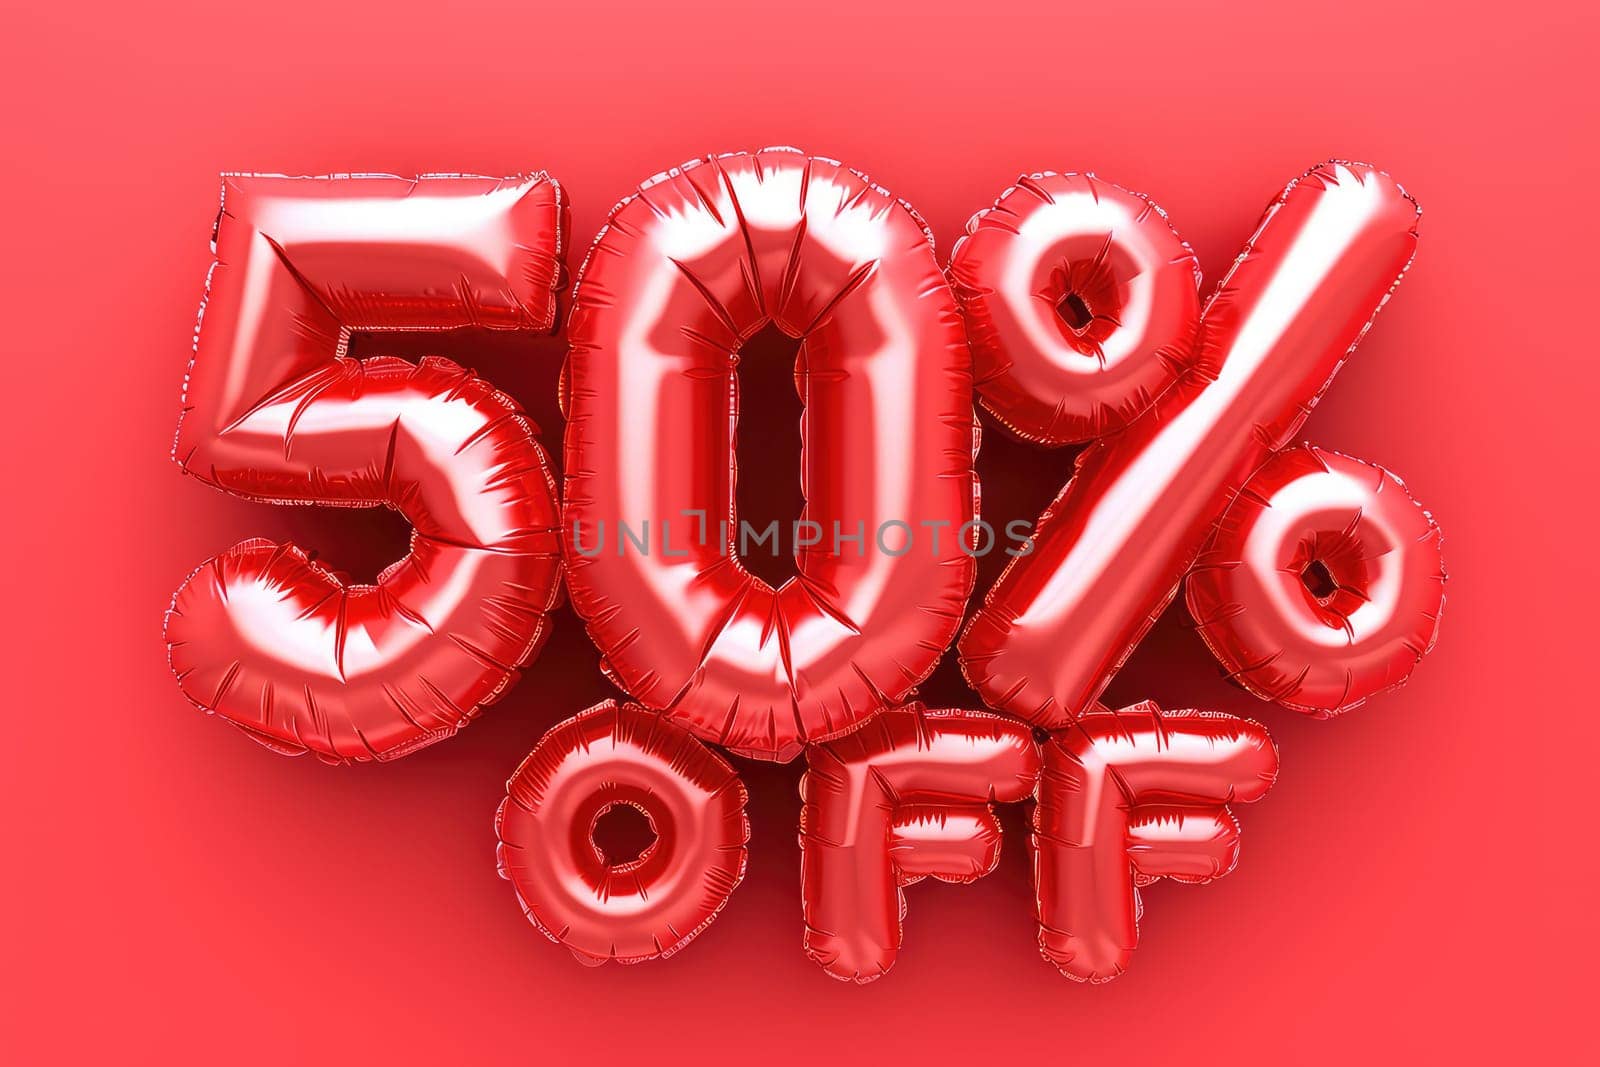 Retail Sale Promotion with Red Balloons Reading 50 Percent Off in a Shopping Mall Setting by Dvorak